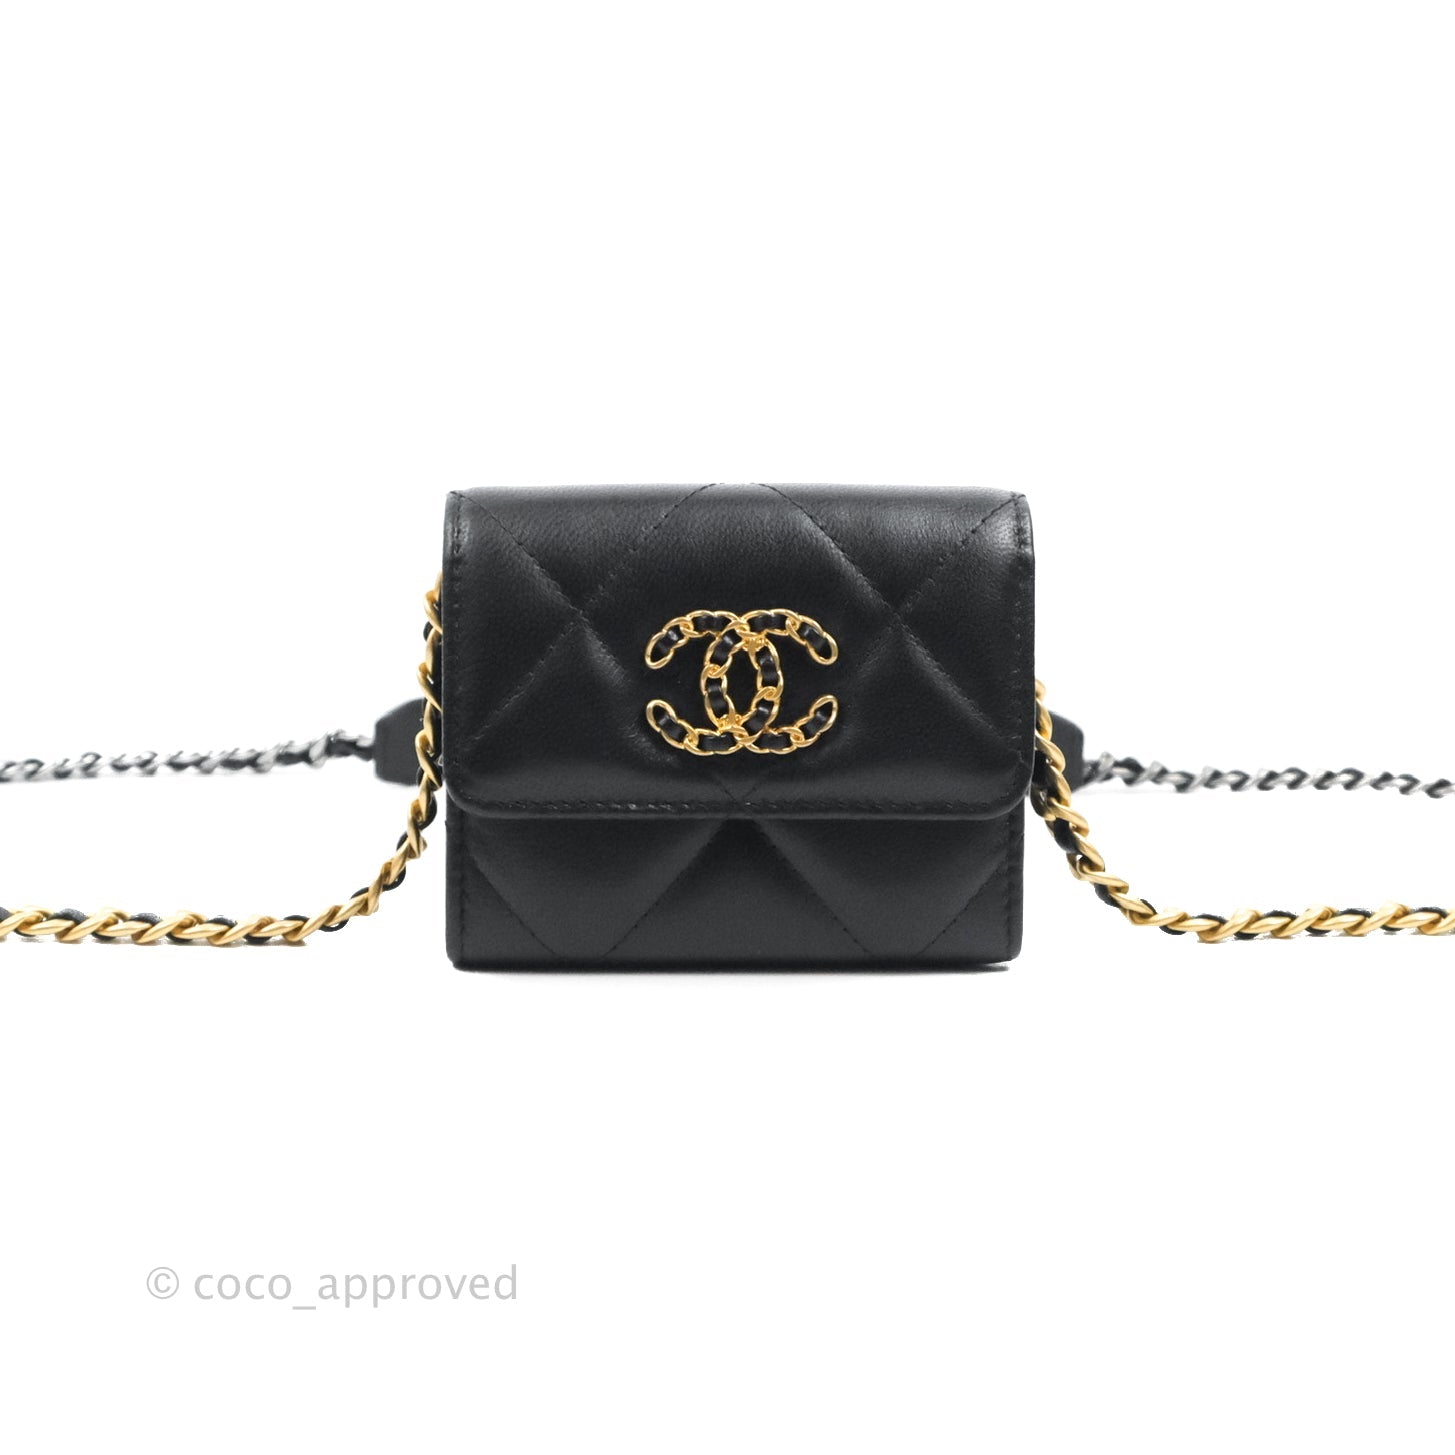 Chanel Lambskin Quilted Medium Chanel 19 Flap Black